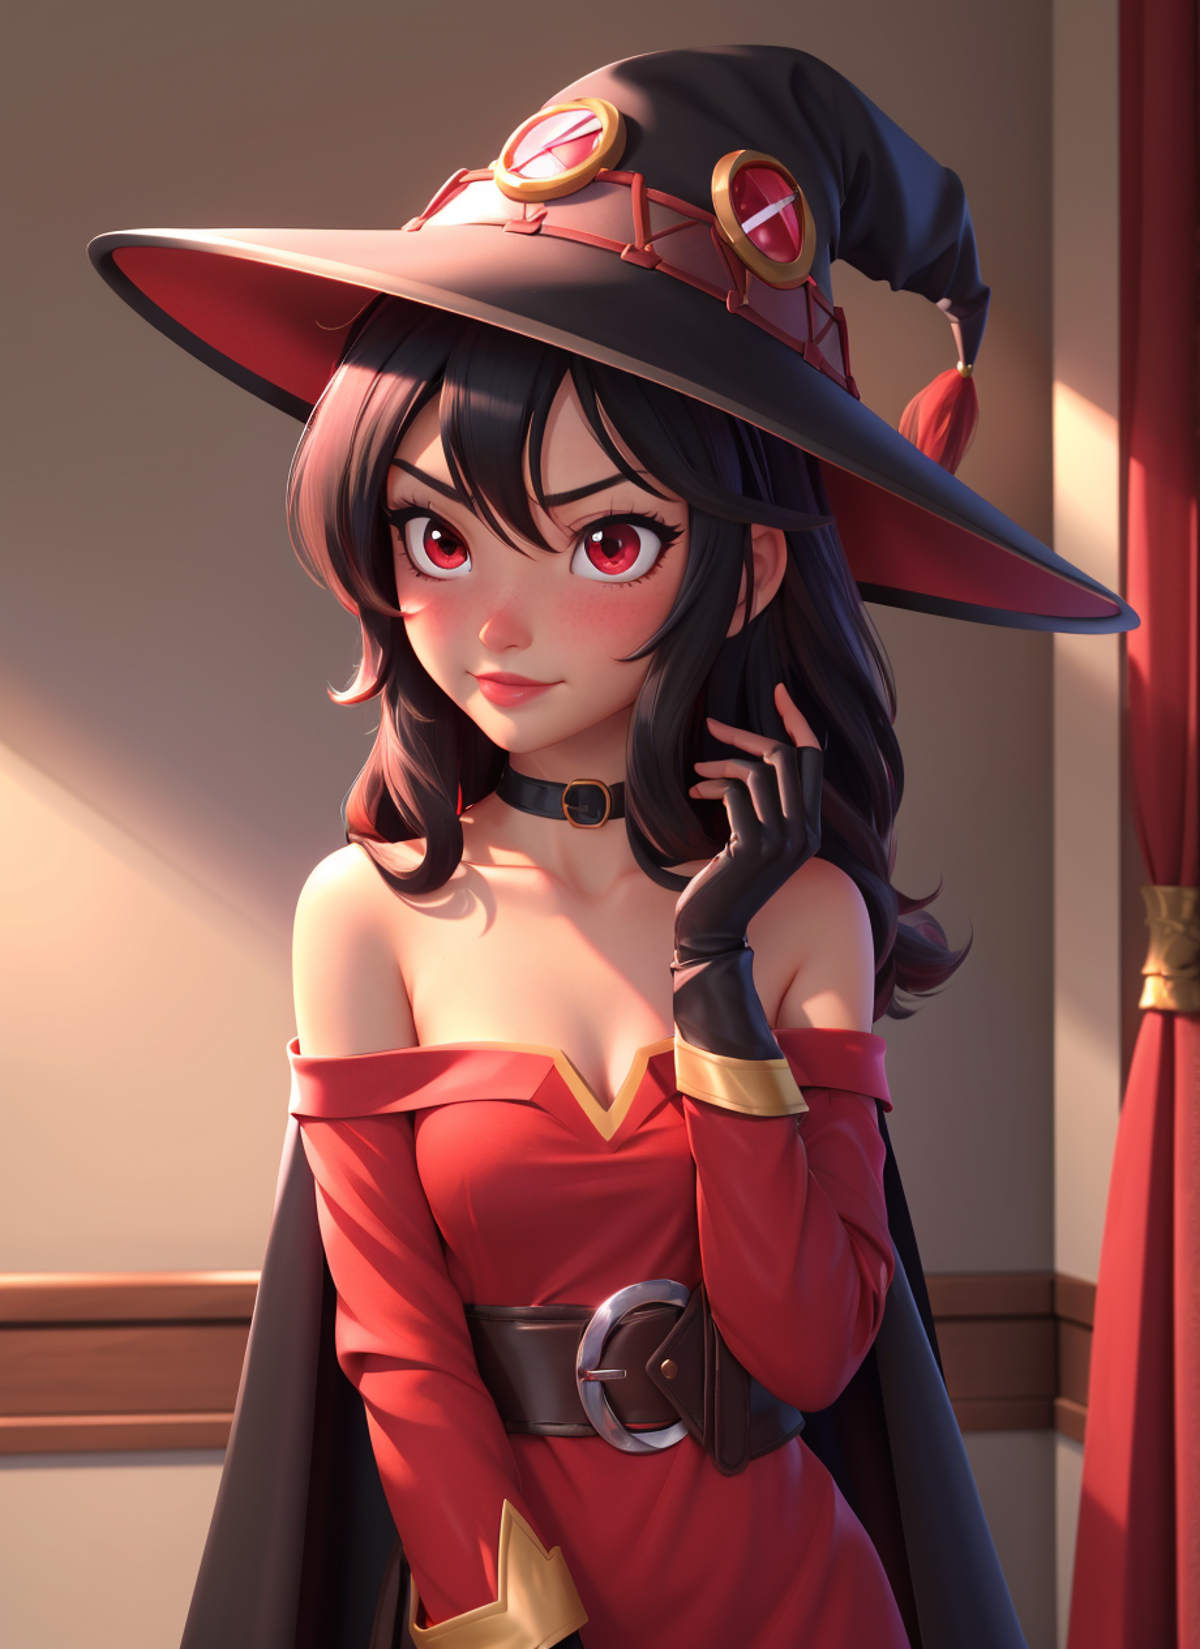 A cartoon illustration of a woman wearing a witch's hat and outfit.